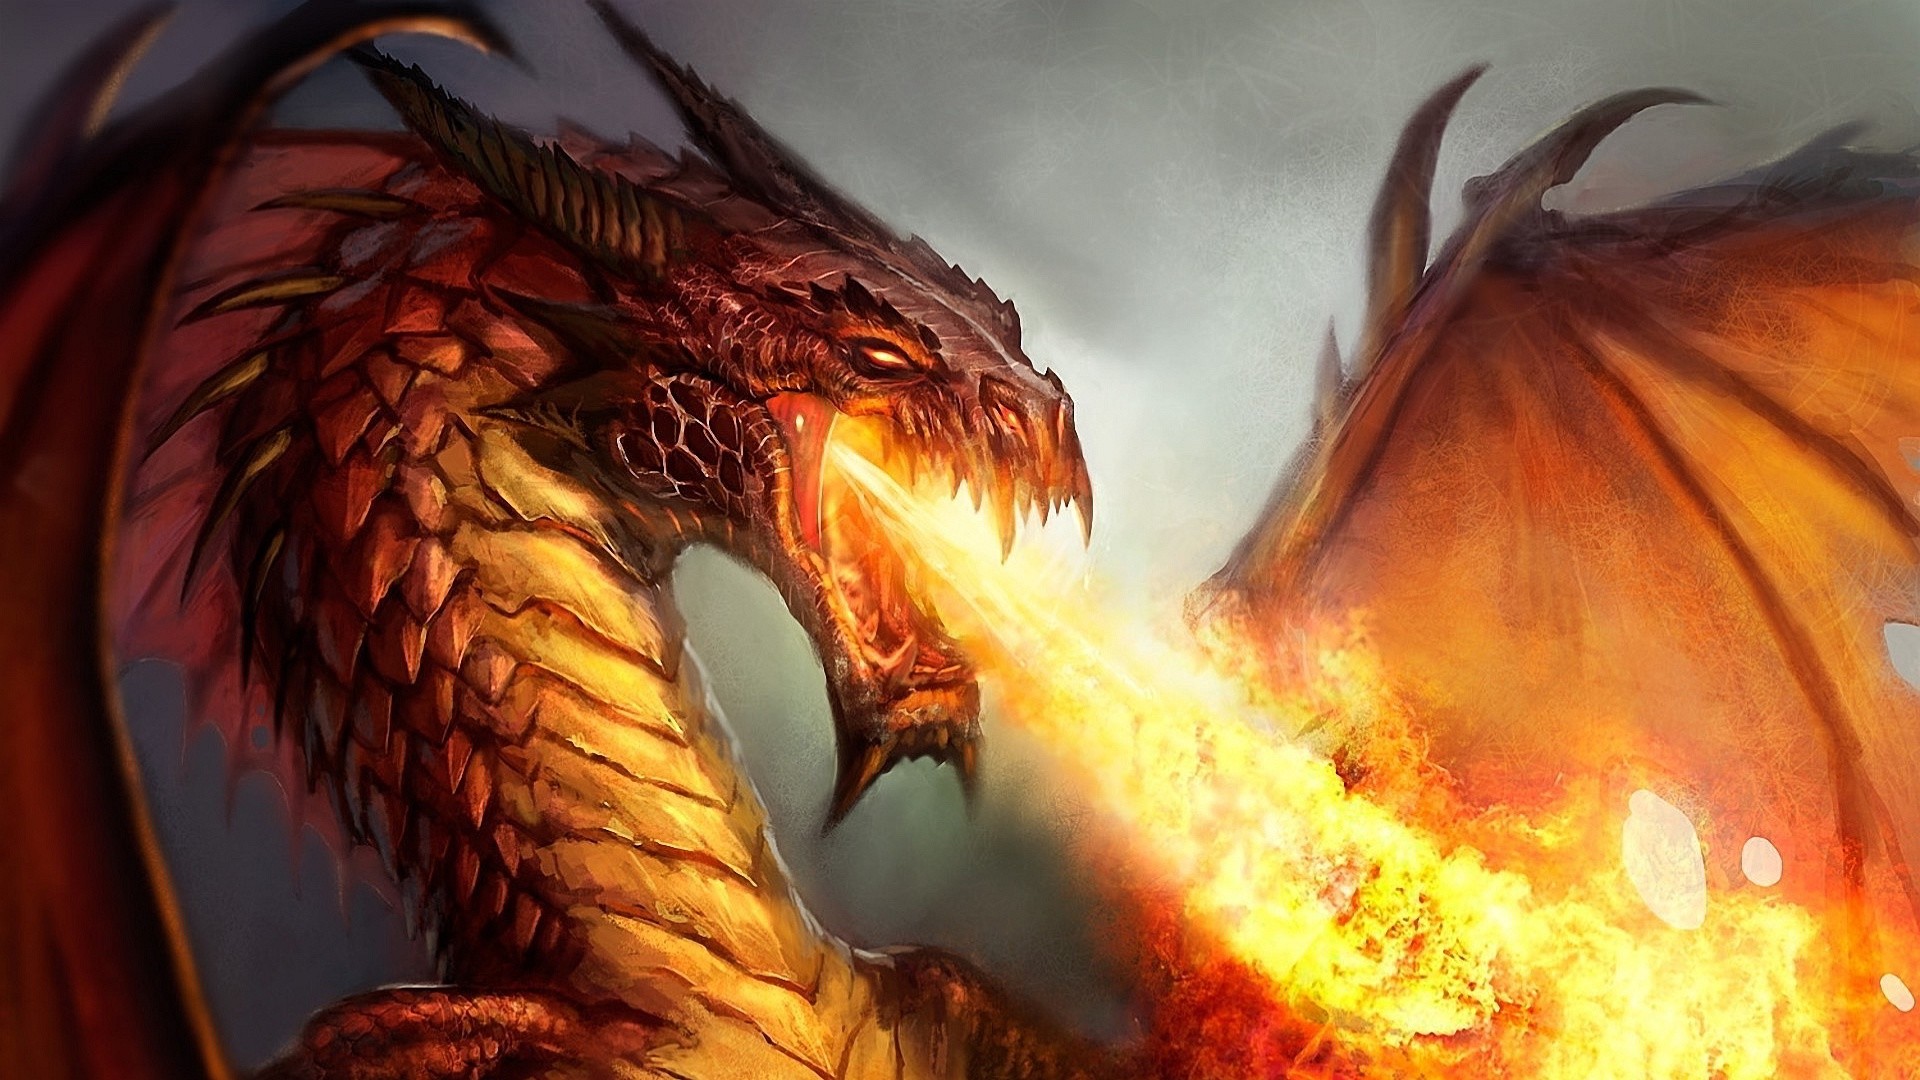 Backgrounds In High Quality: Dragon by Angle Sprowl, 05/03/2015